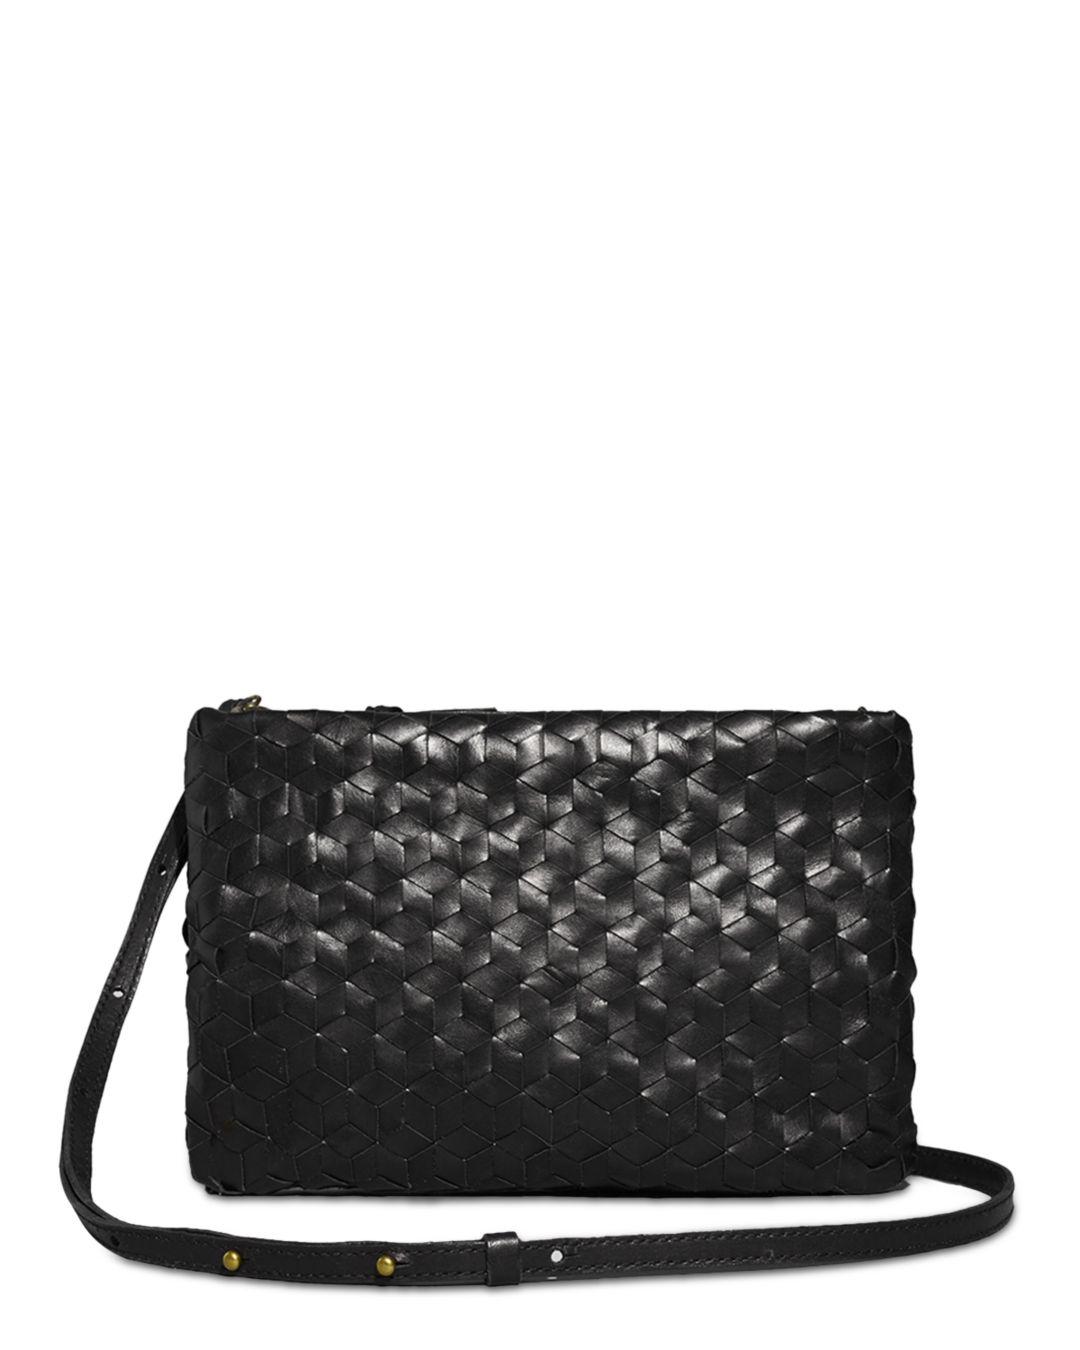 Madewell Woven Leather Puff Crossbody in Black | Lyst